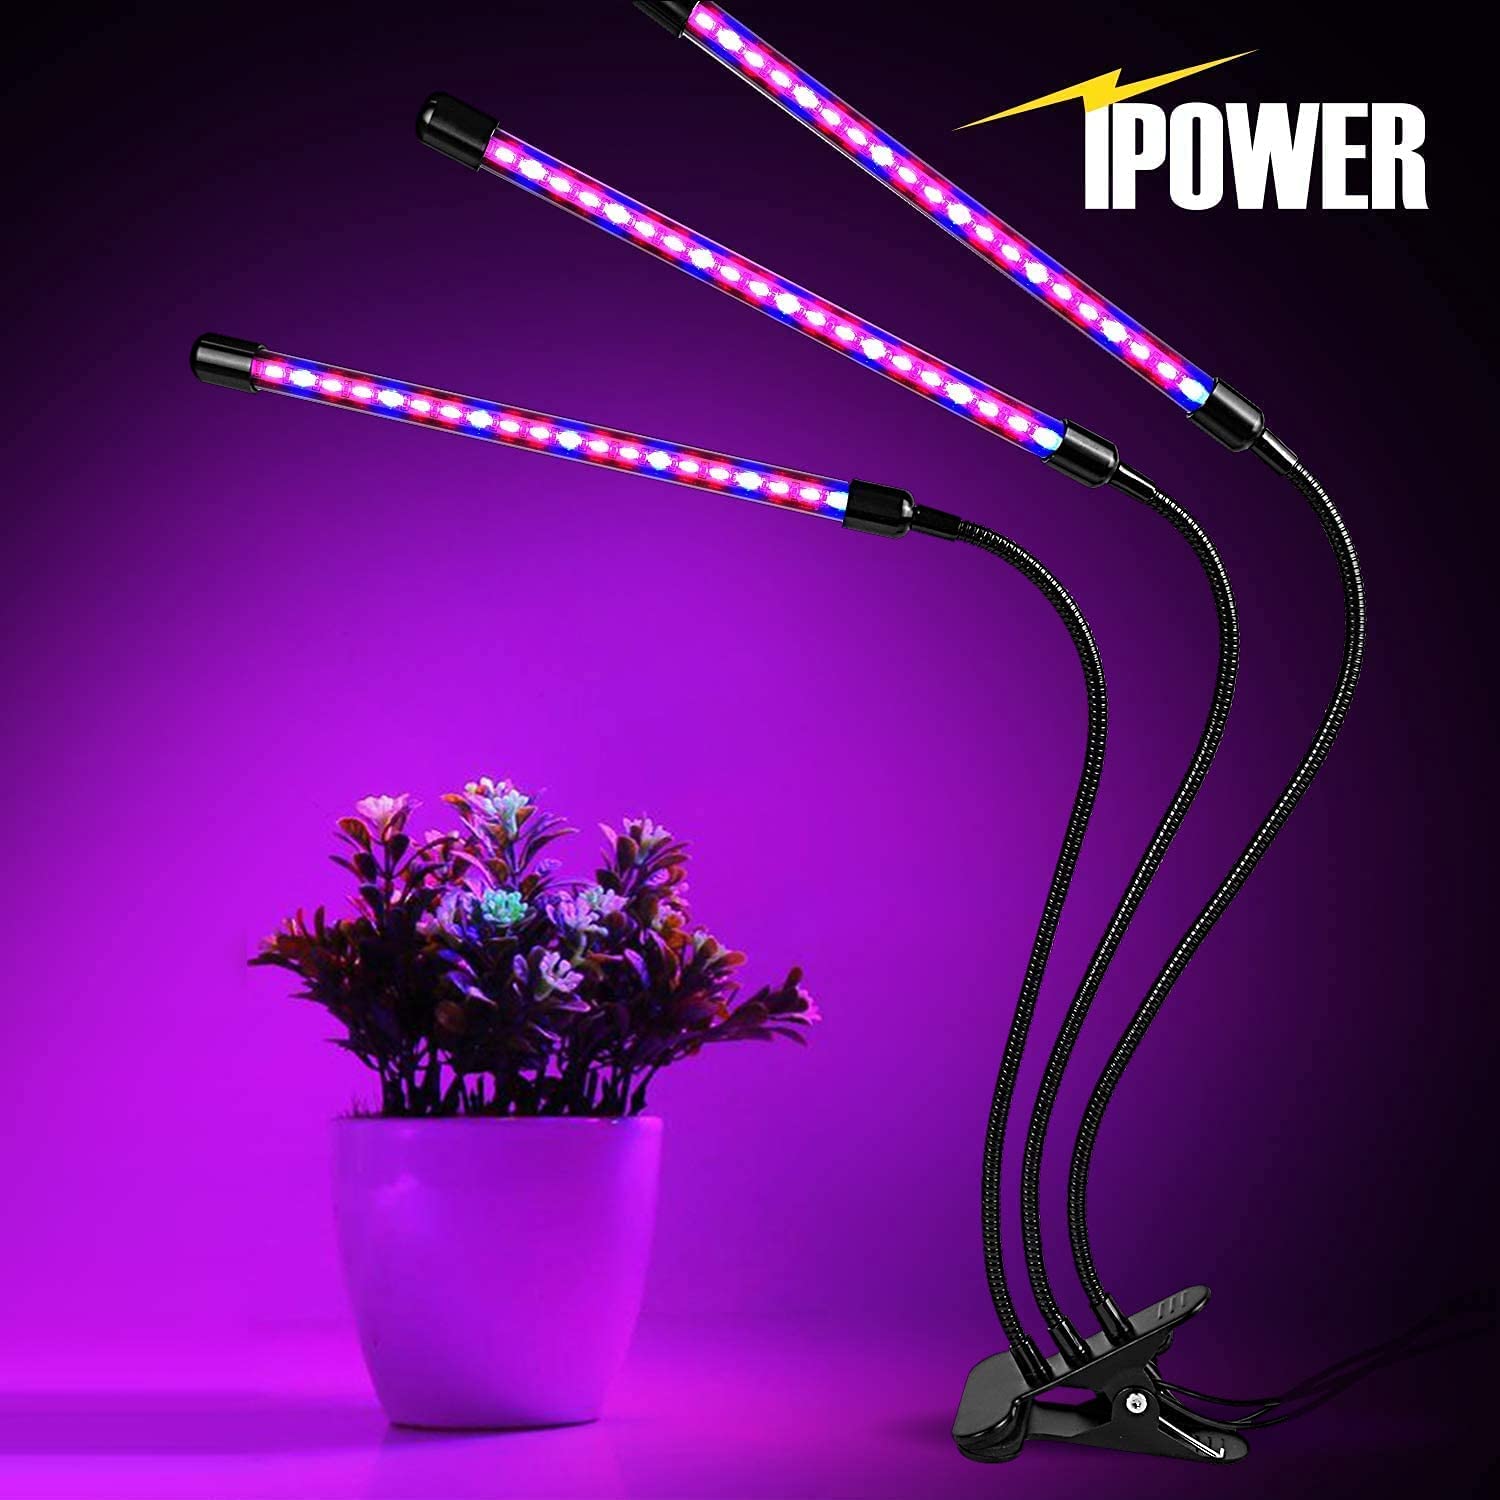 iPower LED Grow Lights with Full Spectrum Plant Growing Lamp for Indoor Plant, 3 Modes Timing Function, 3 Tubes, Red&Blue